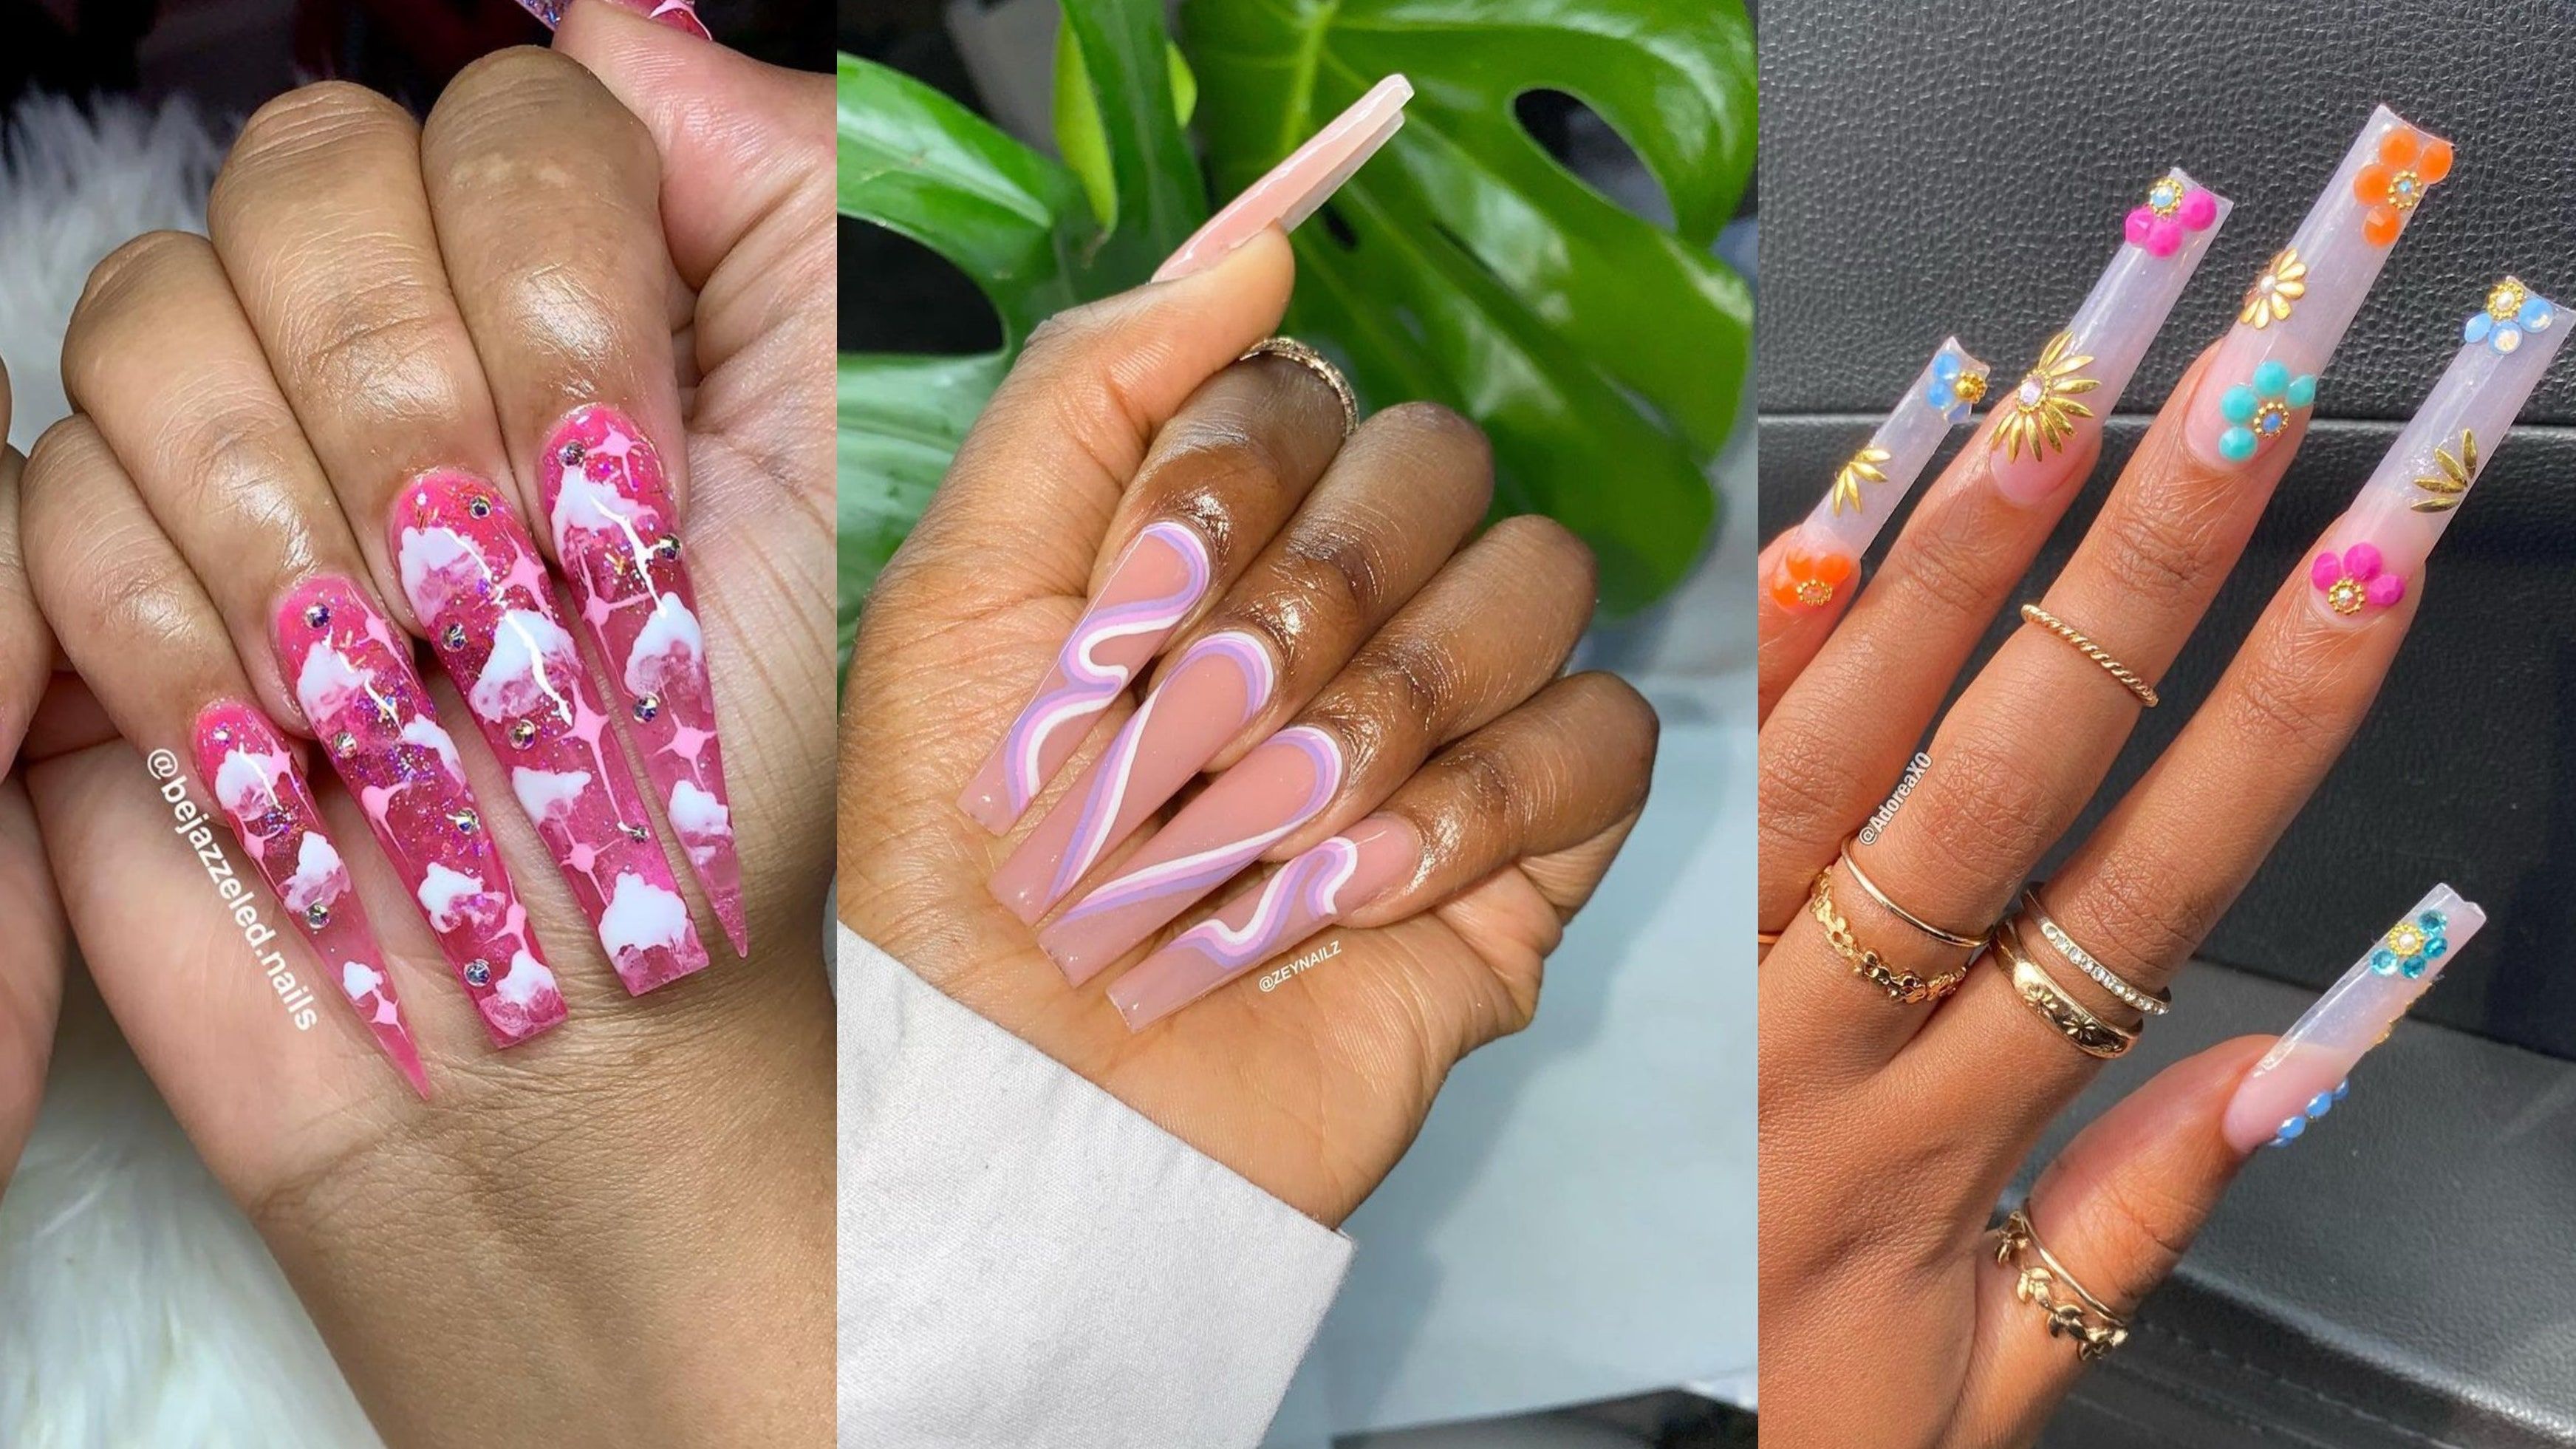 Three different sets of nails, one with a cow print design, one with clear nails with flowers and stars, and one with a clear base and hearts - Nails